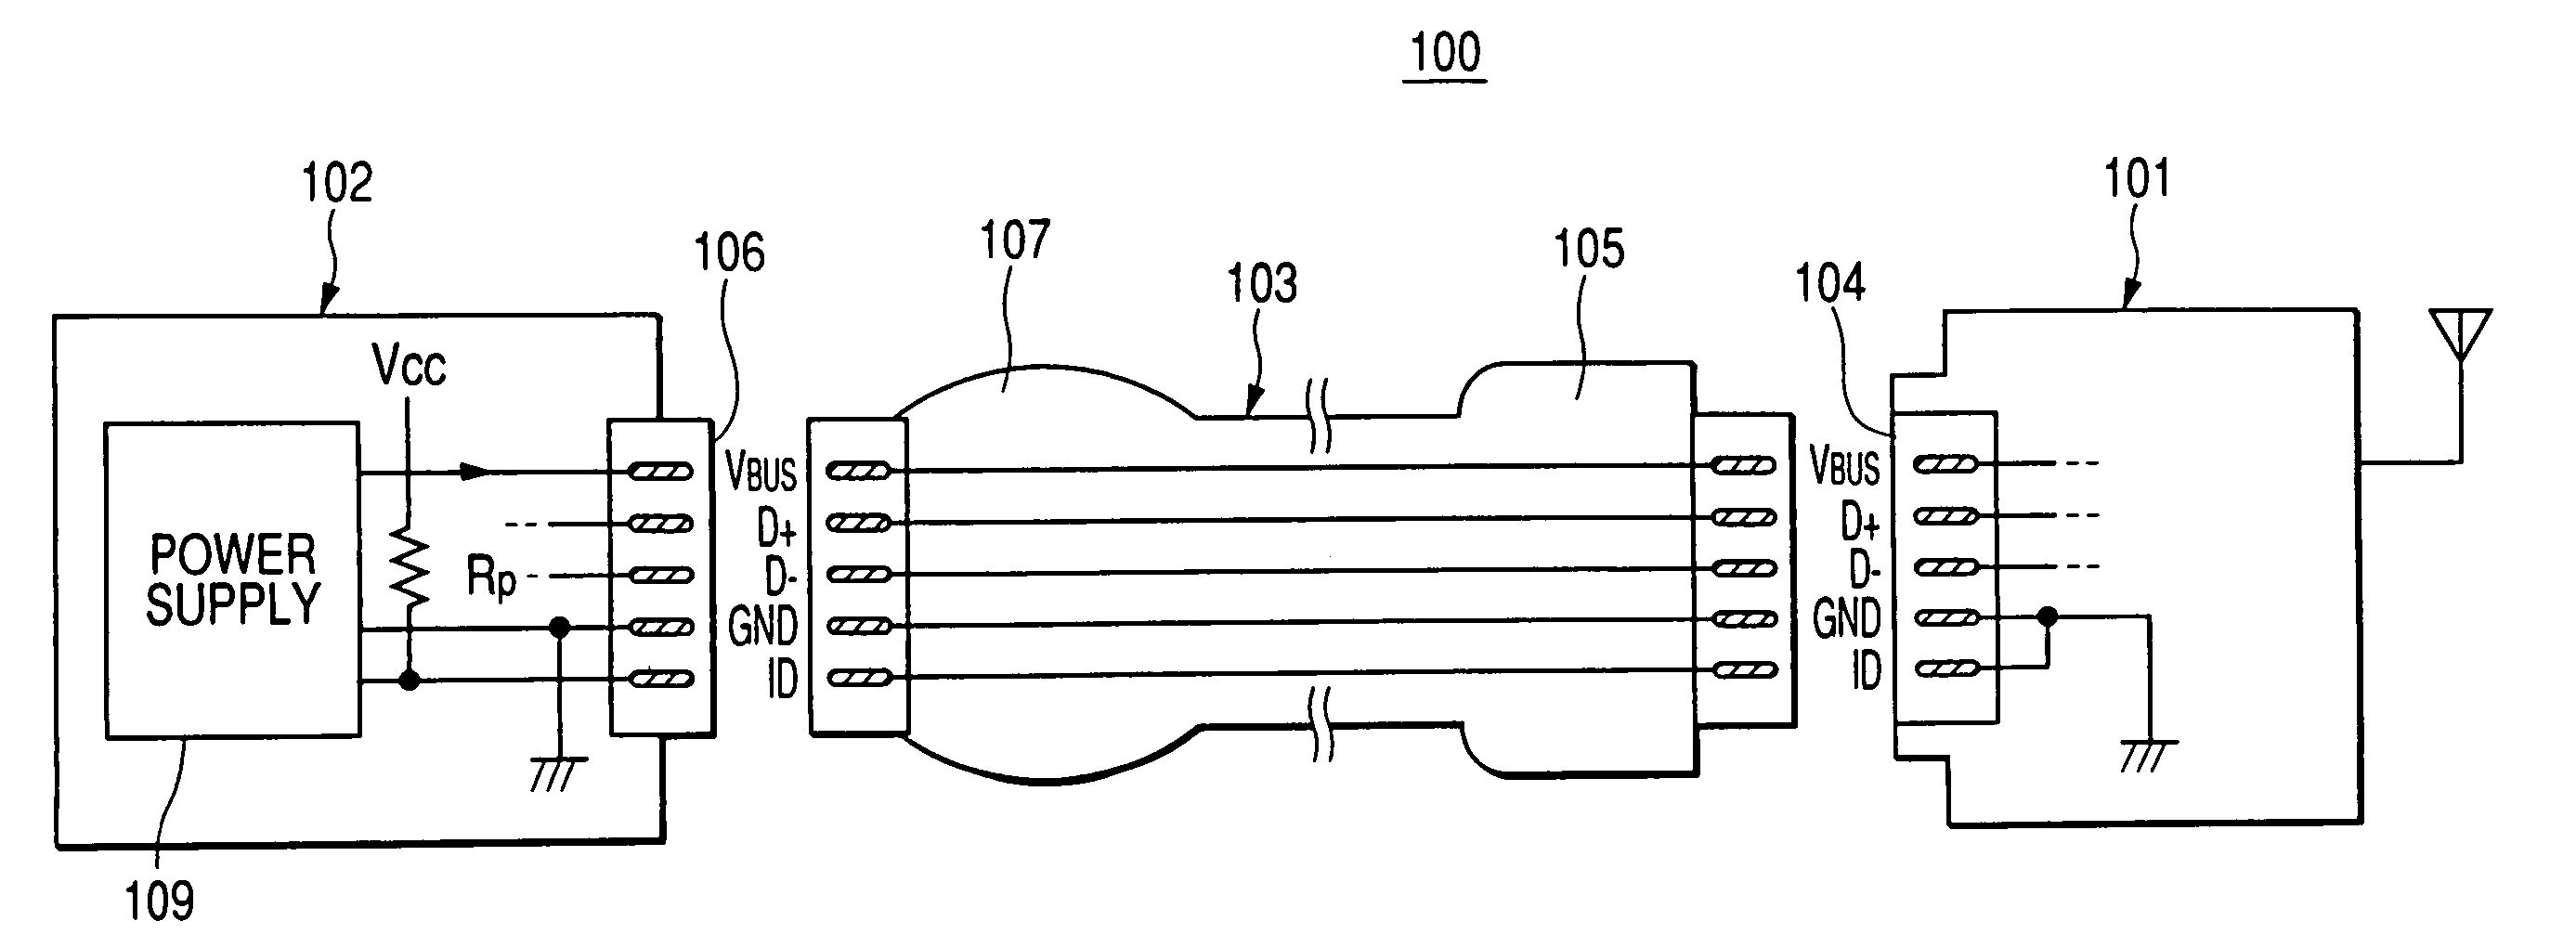 Device that provides power to a host via a Mini-B interface upon detection of a predetermined voltage